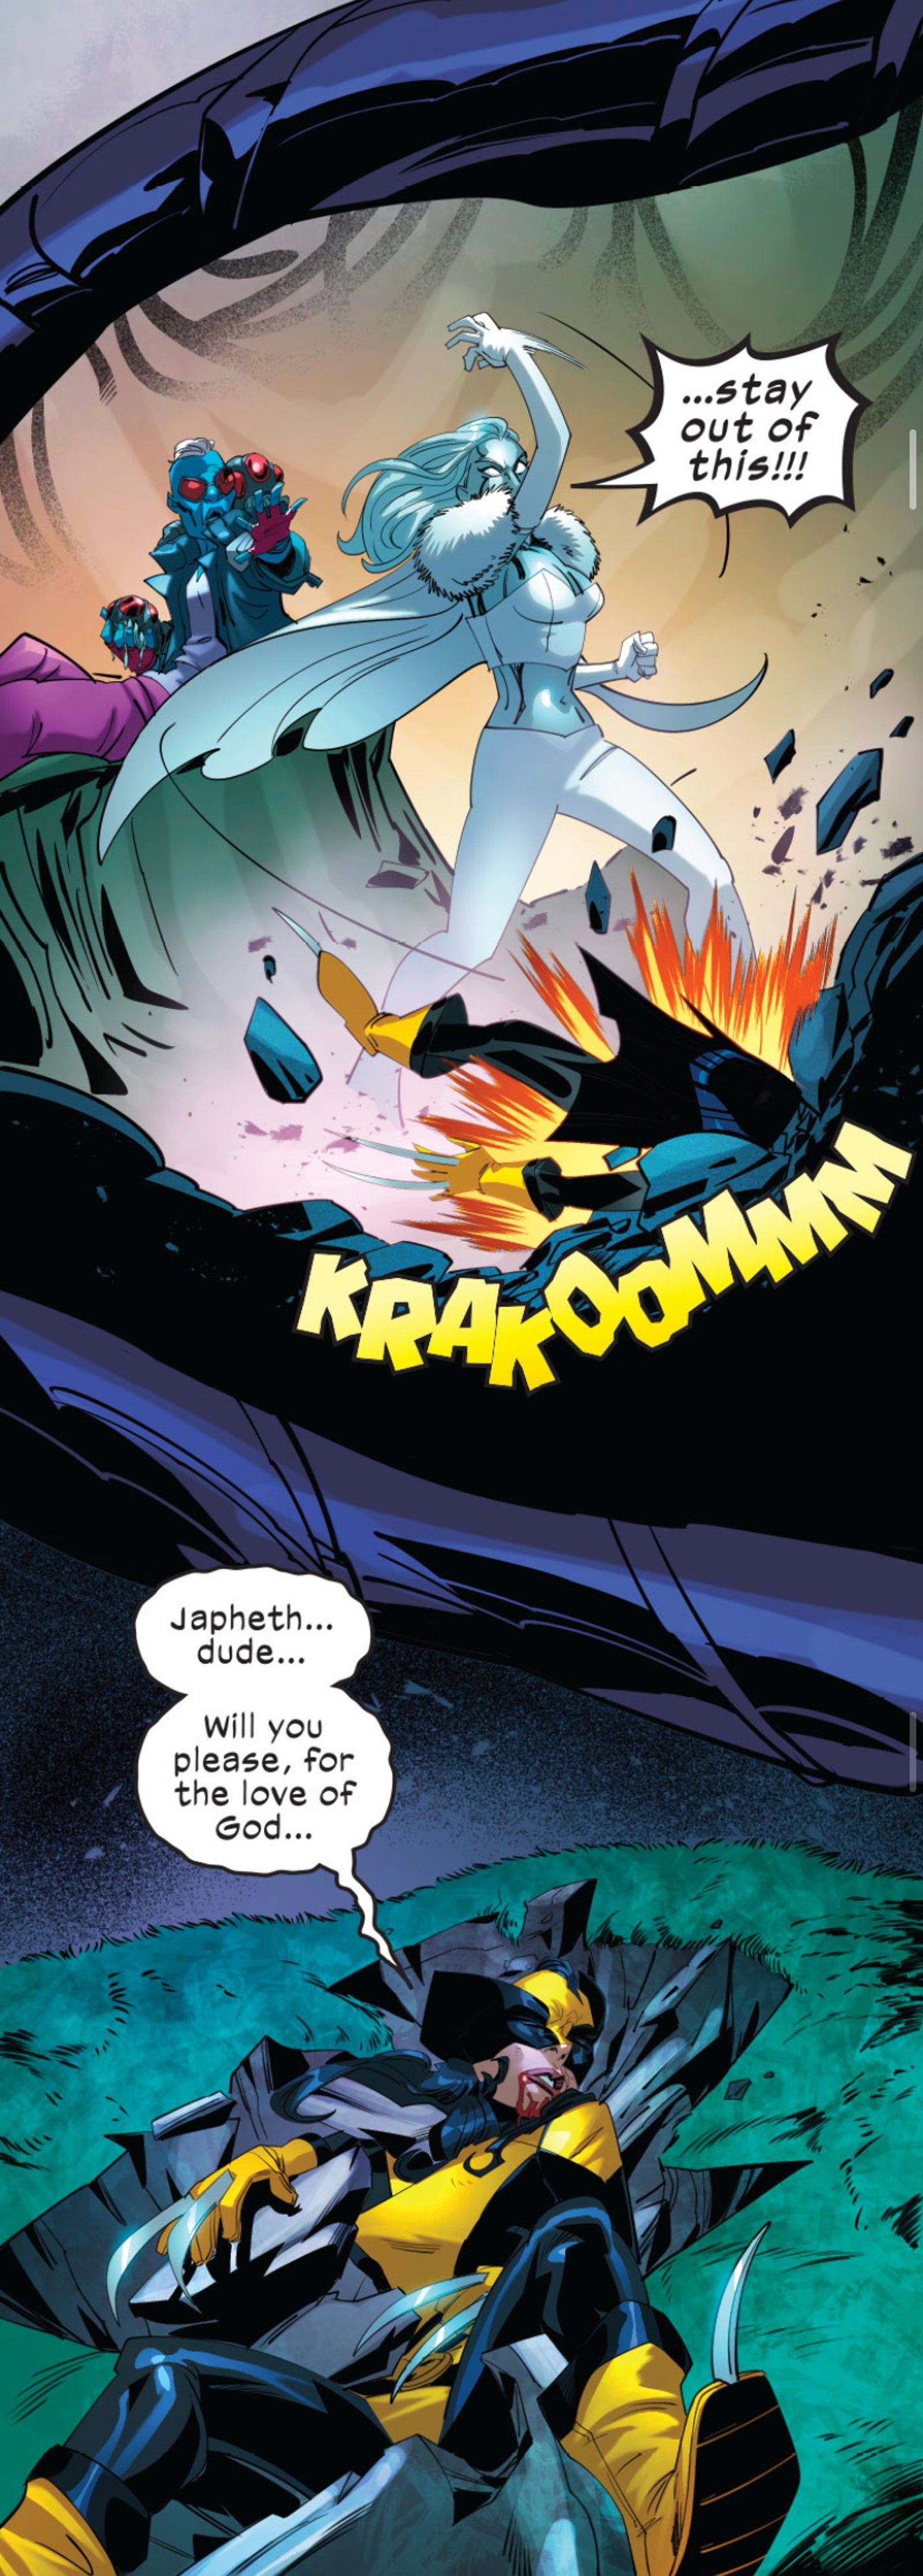 Wolverine Vs Emma Frost Officially Settle Which is More Indestructible